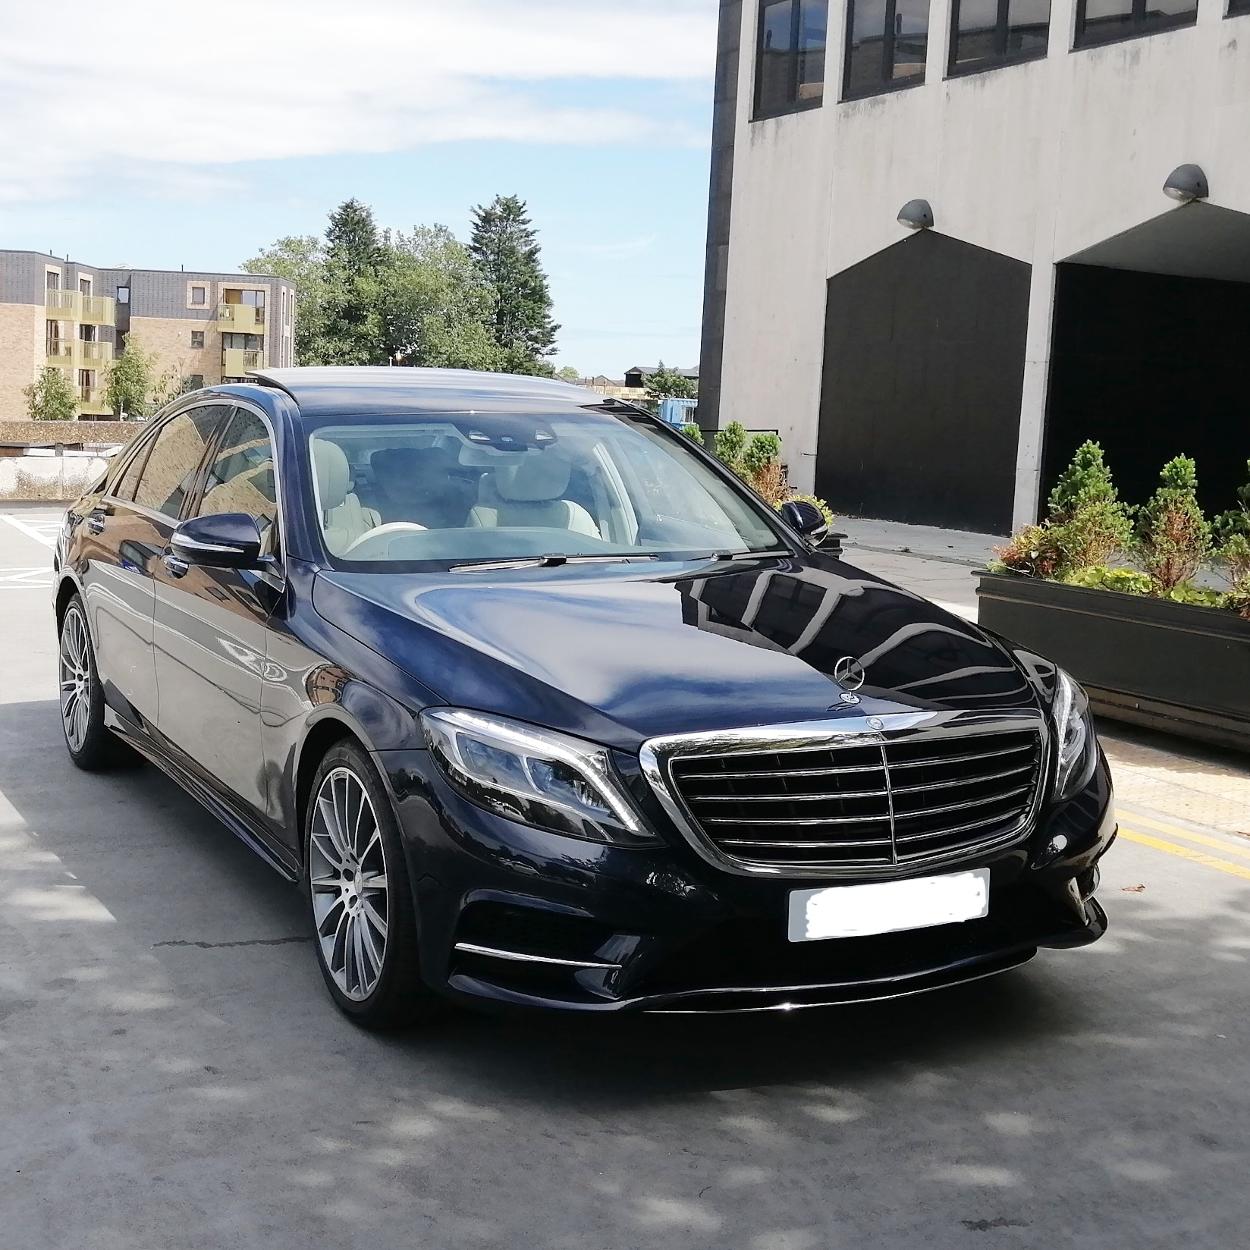 Southend Chauffeur & Southend Airport Transfers  | Essex Chauffeurs gallery image 2